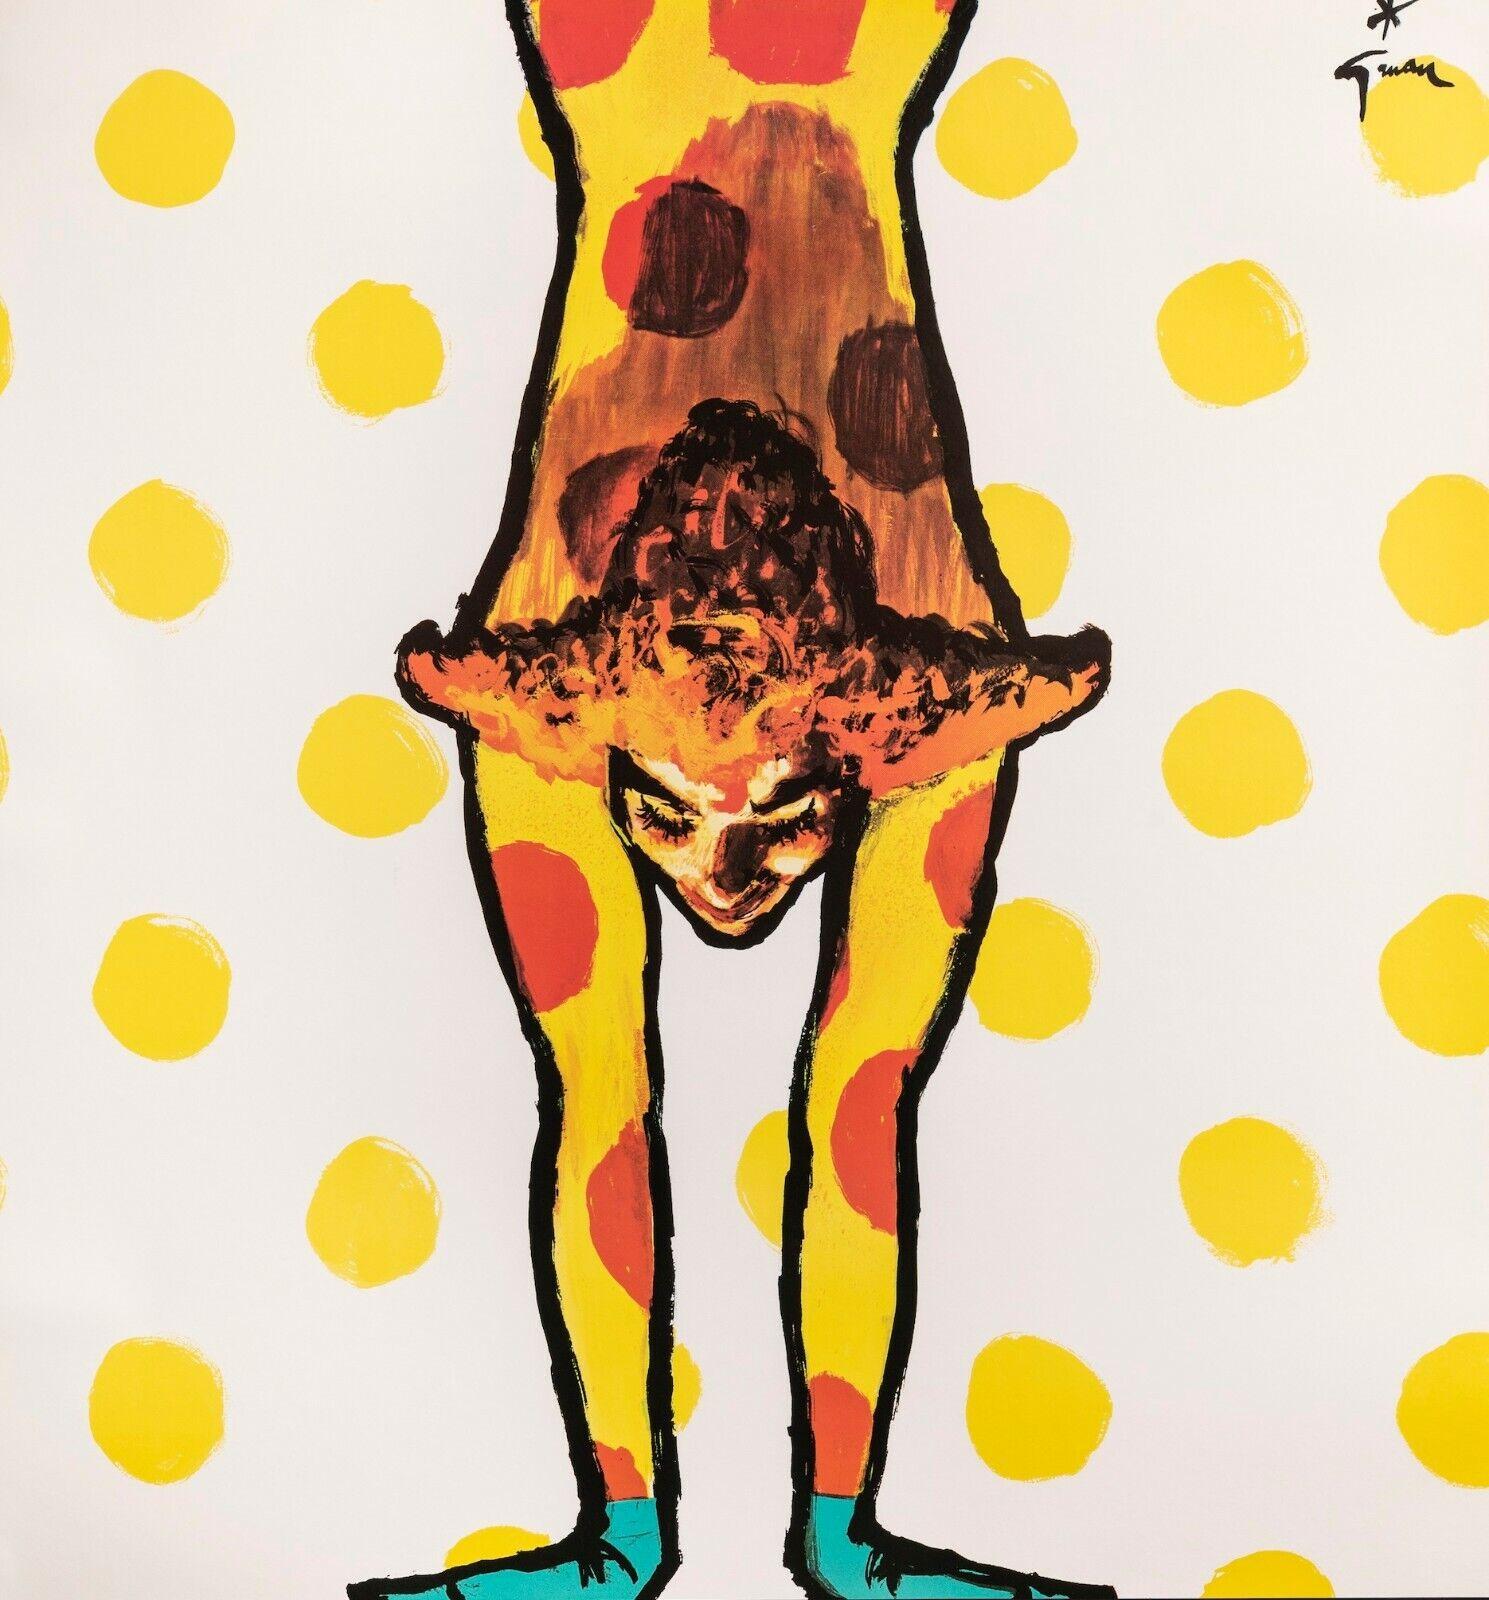 Original Poster-Gruau-Assézat-Fashion-Clothing-Clown-Acrobat, c.1980

Poster for the promotion of Bemberg. The poster shows an acrobat wearing Bemberg costume.

Additional details:
Materials and techniques: colour lithograph on paper
Features: